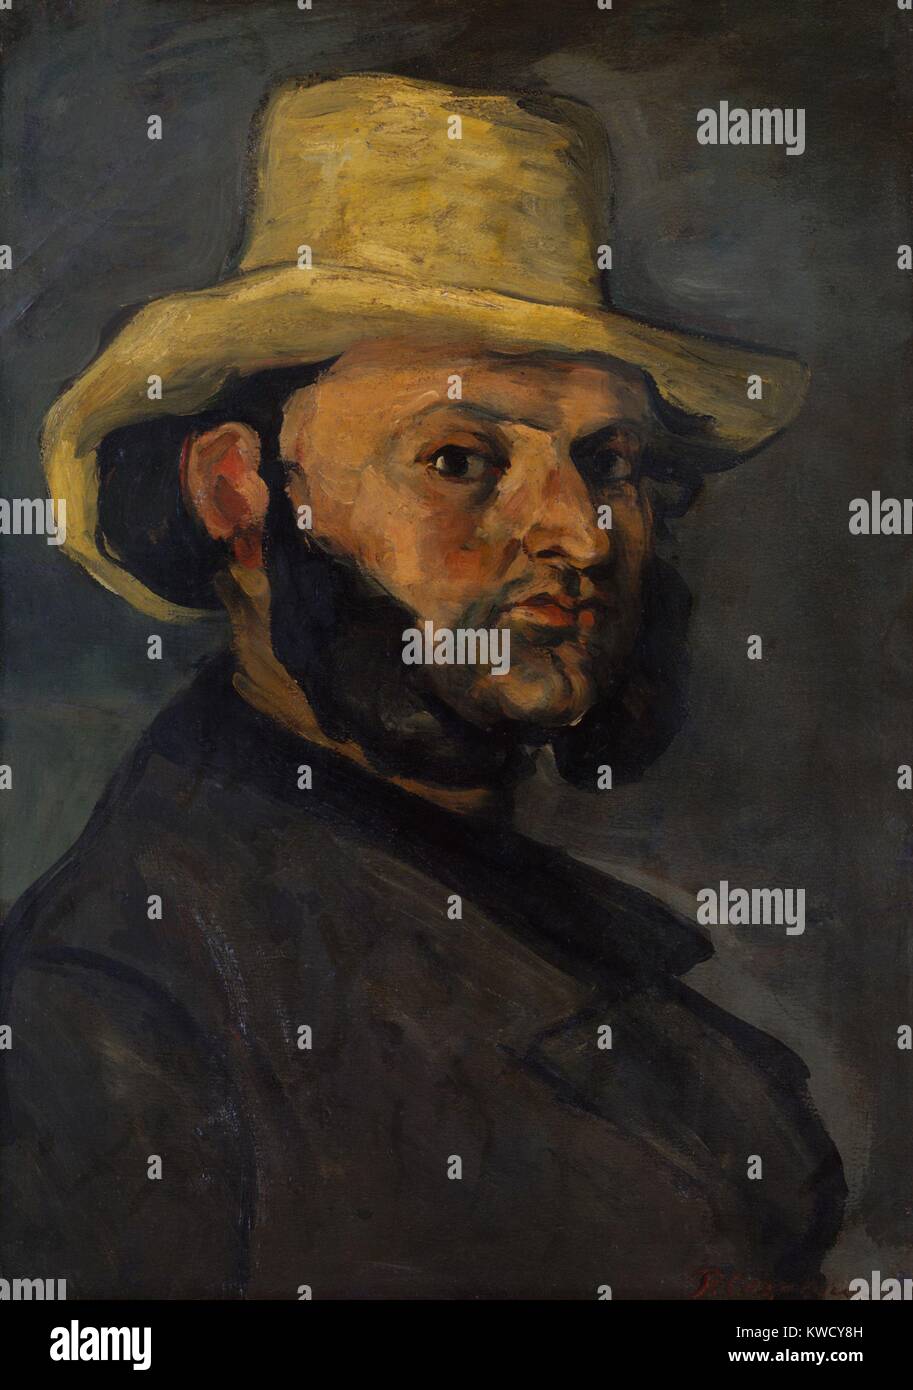 Gustave Boyer, by Paul Cezanne, 1870-71, French Post-Impressionist painting, oil on canvas. This is a portrait of the artists boyhood friend, Gustave Boyer, a lawyer (BSLOC 2017 5 15) Stock Photo